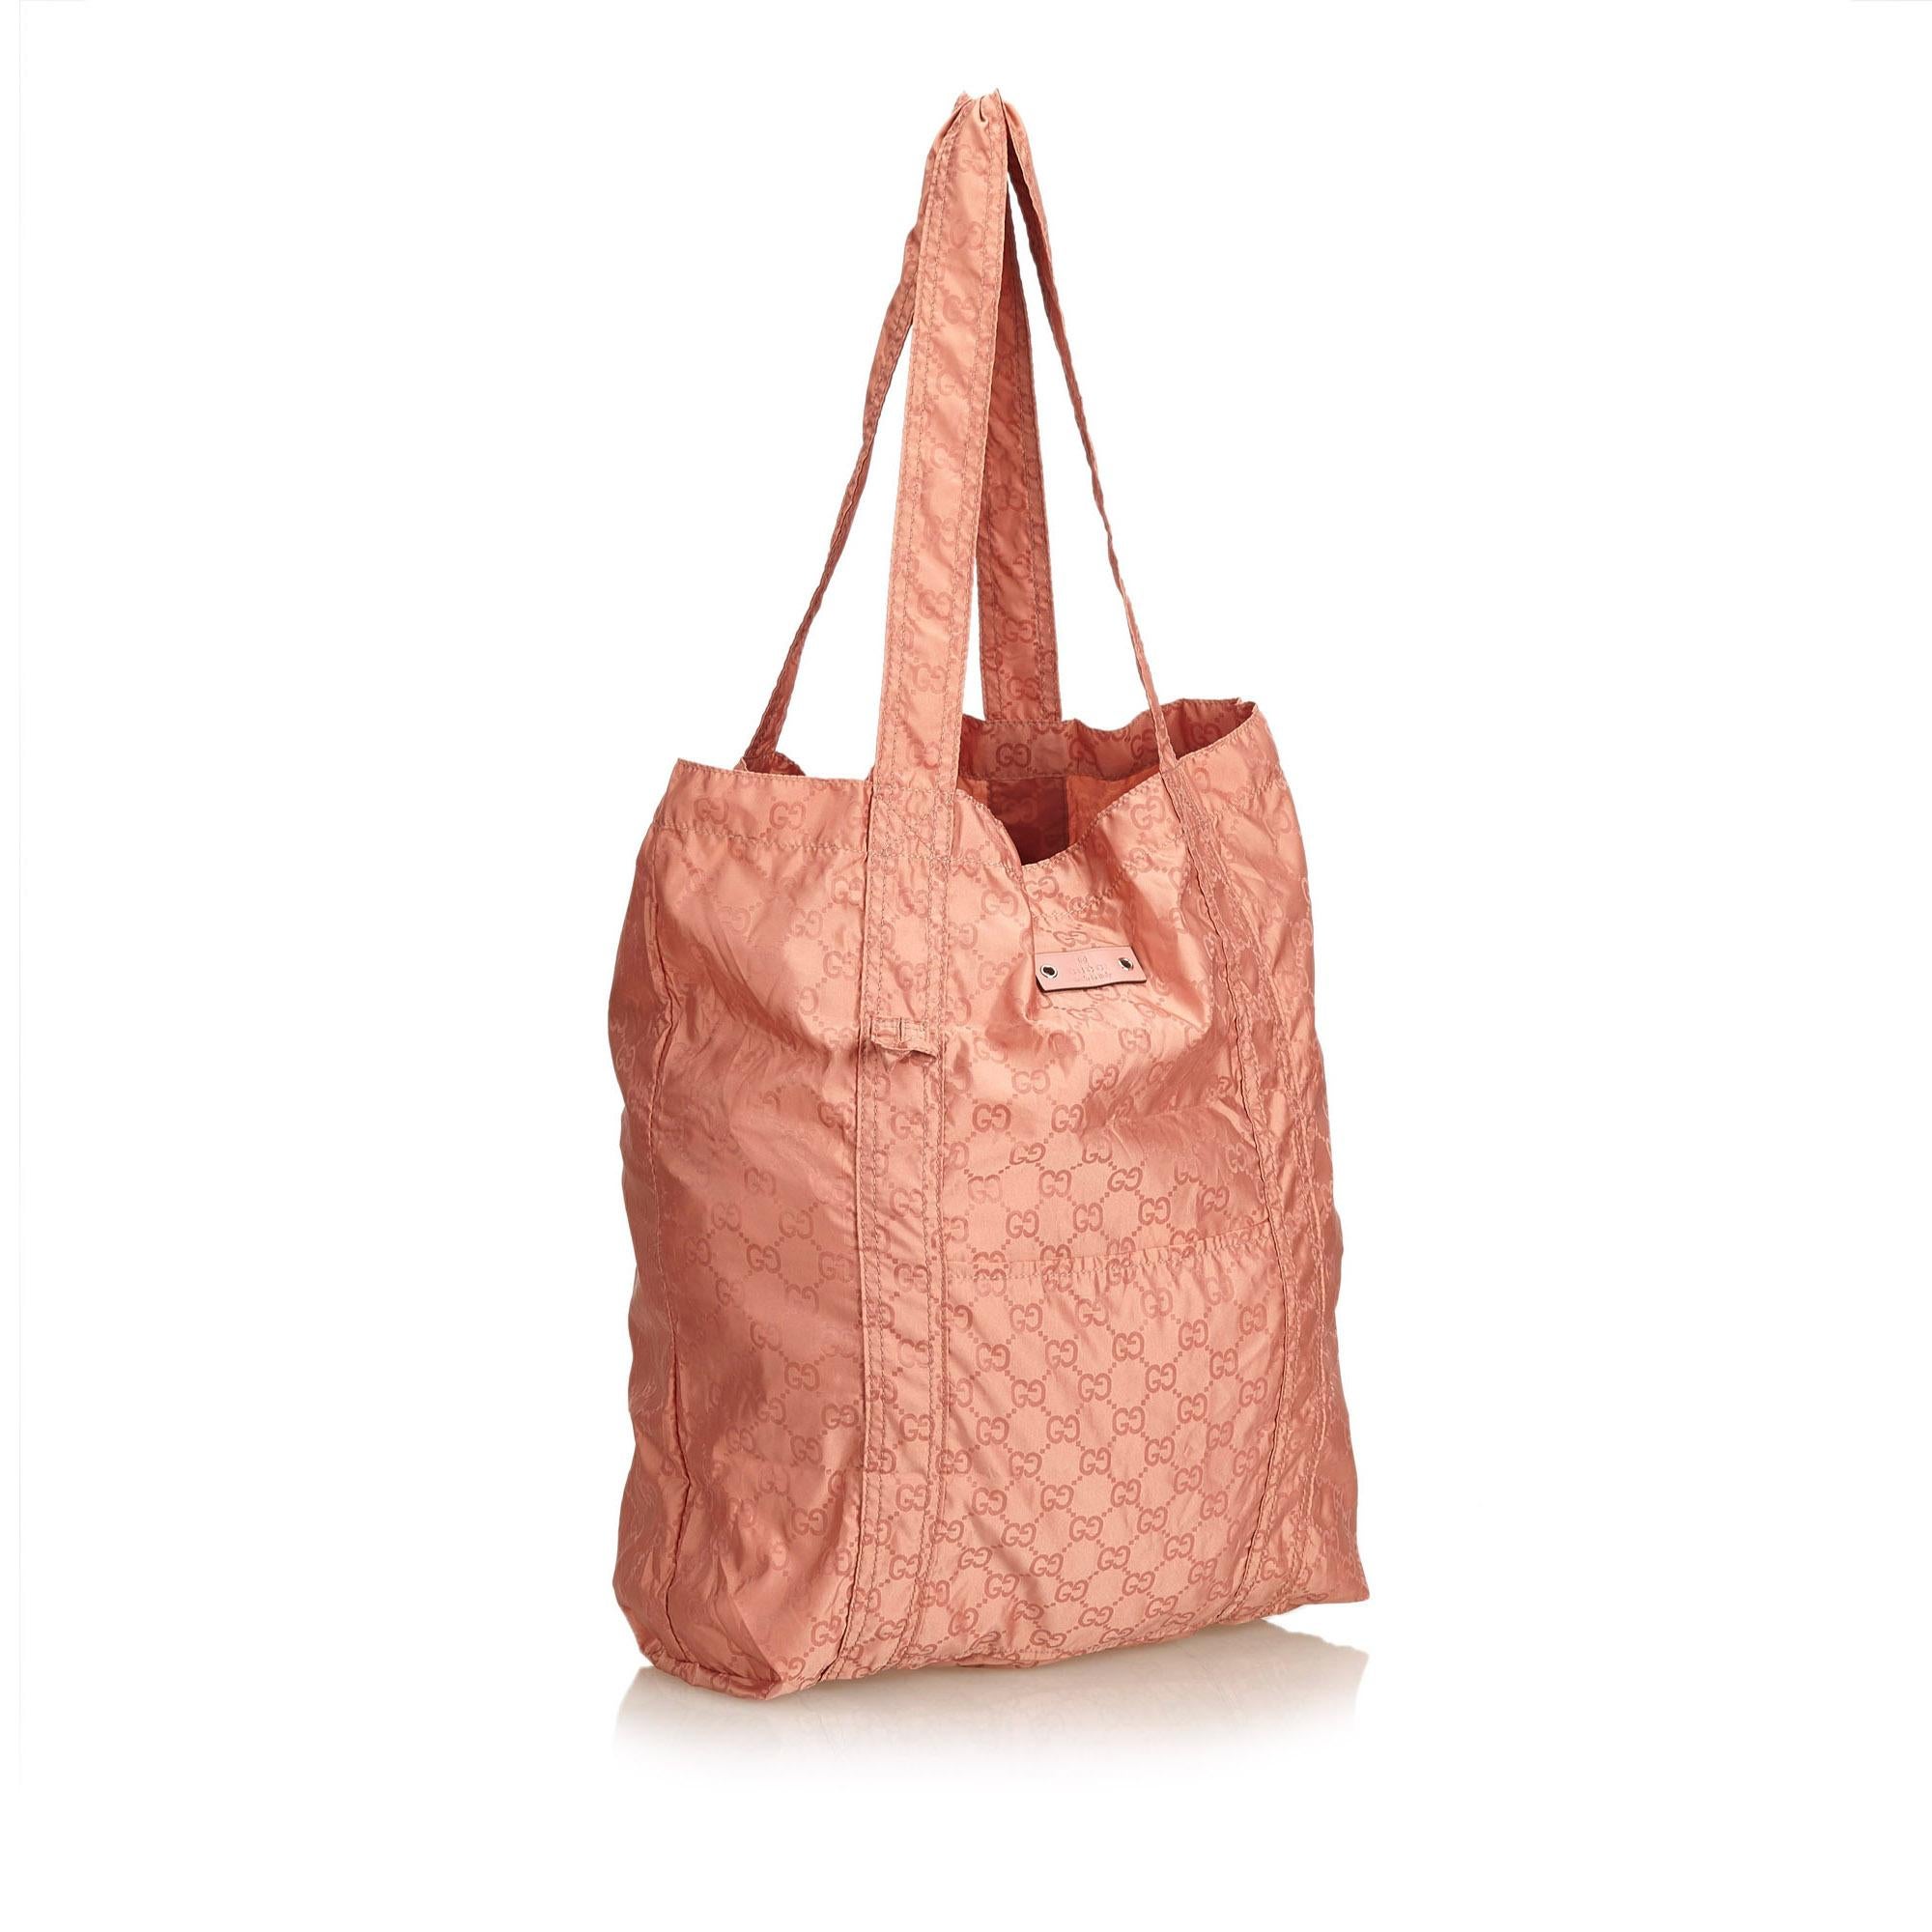 This tote bag features a nylon body, flat nylon strap, open top, and an exterior front open pocket.

It carries a AB condition rating.

Dimensions: 
Length 39.00 cm
Width 27.50 cm
Depth 10.50 cm
Shoulder Drop 28.00 cm

Inclusions: Pouch

Color: